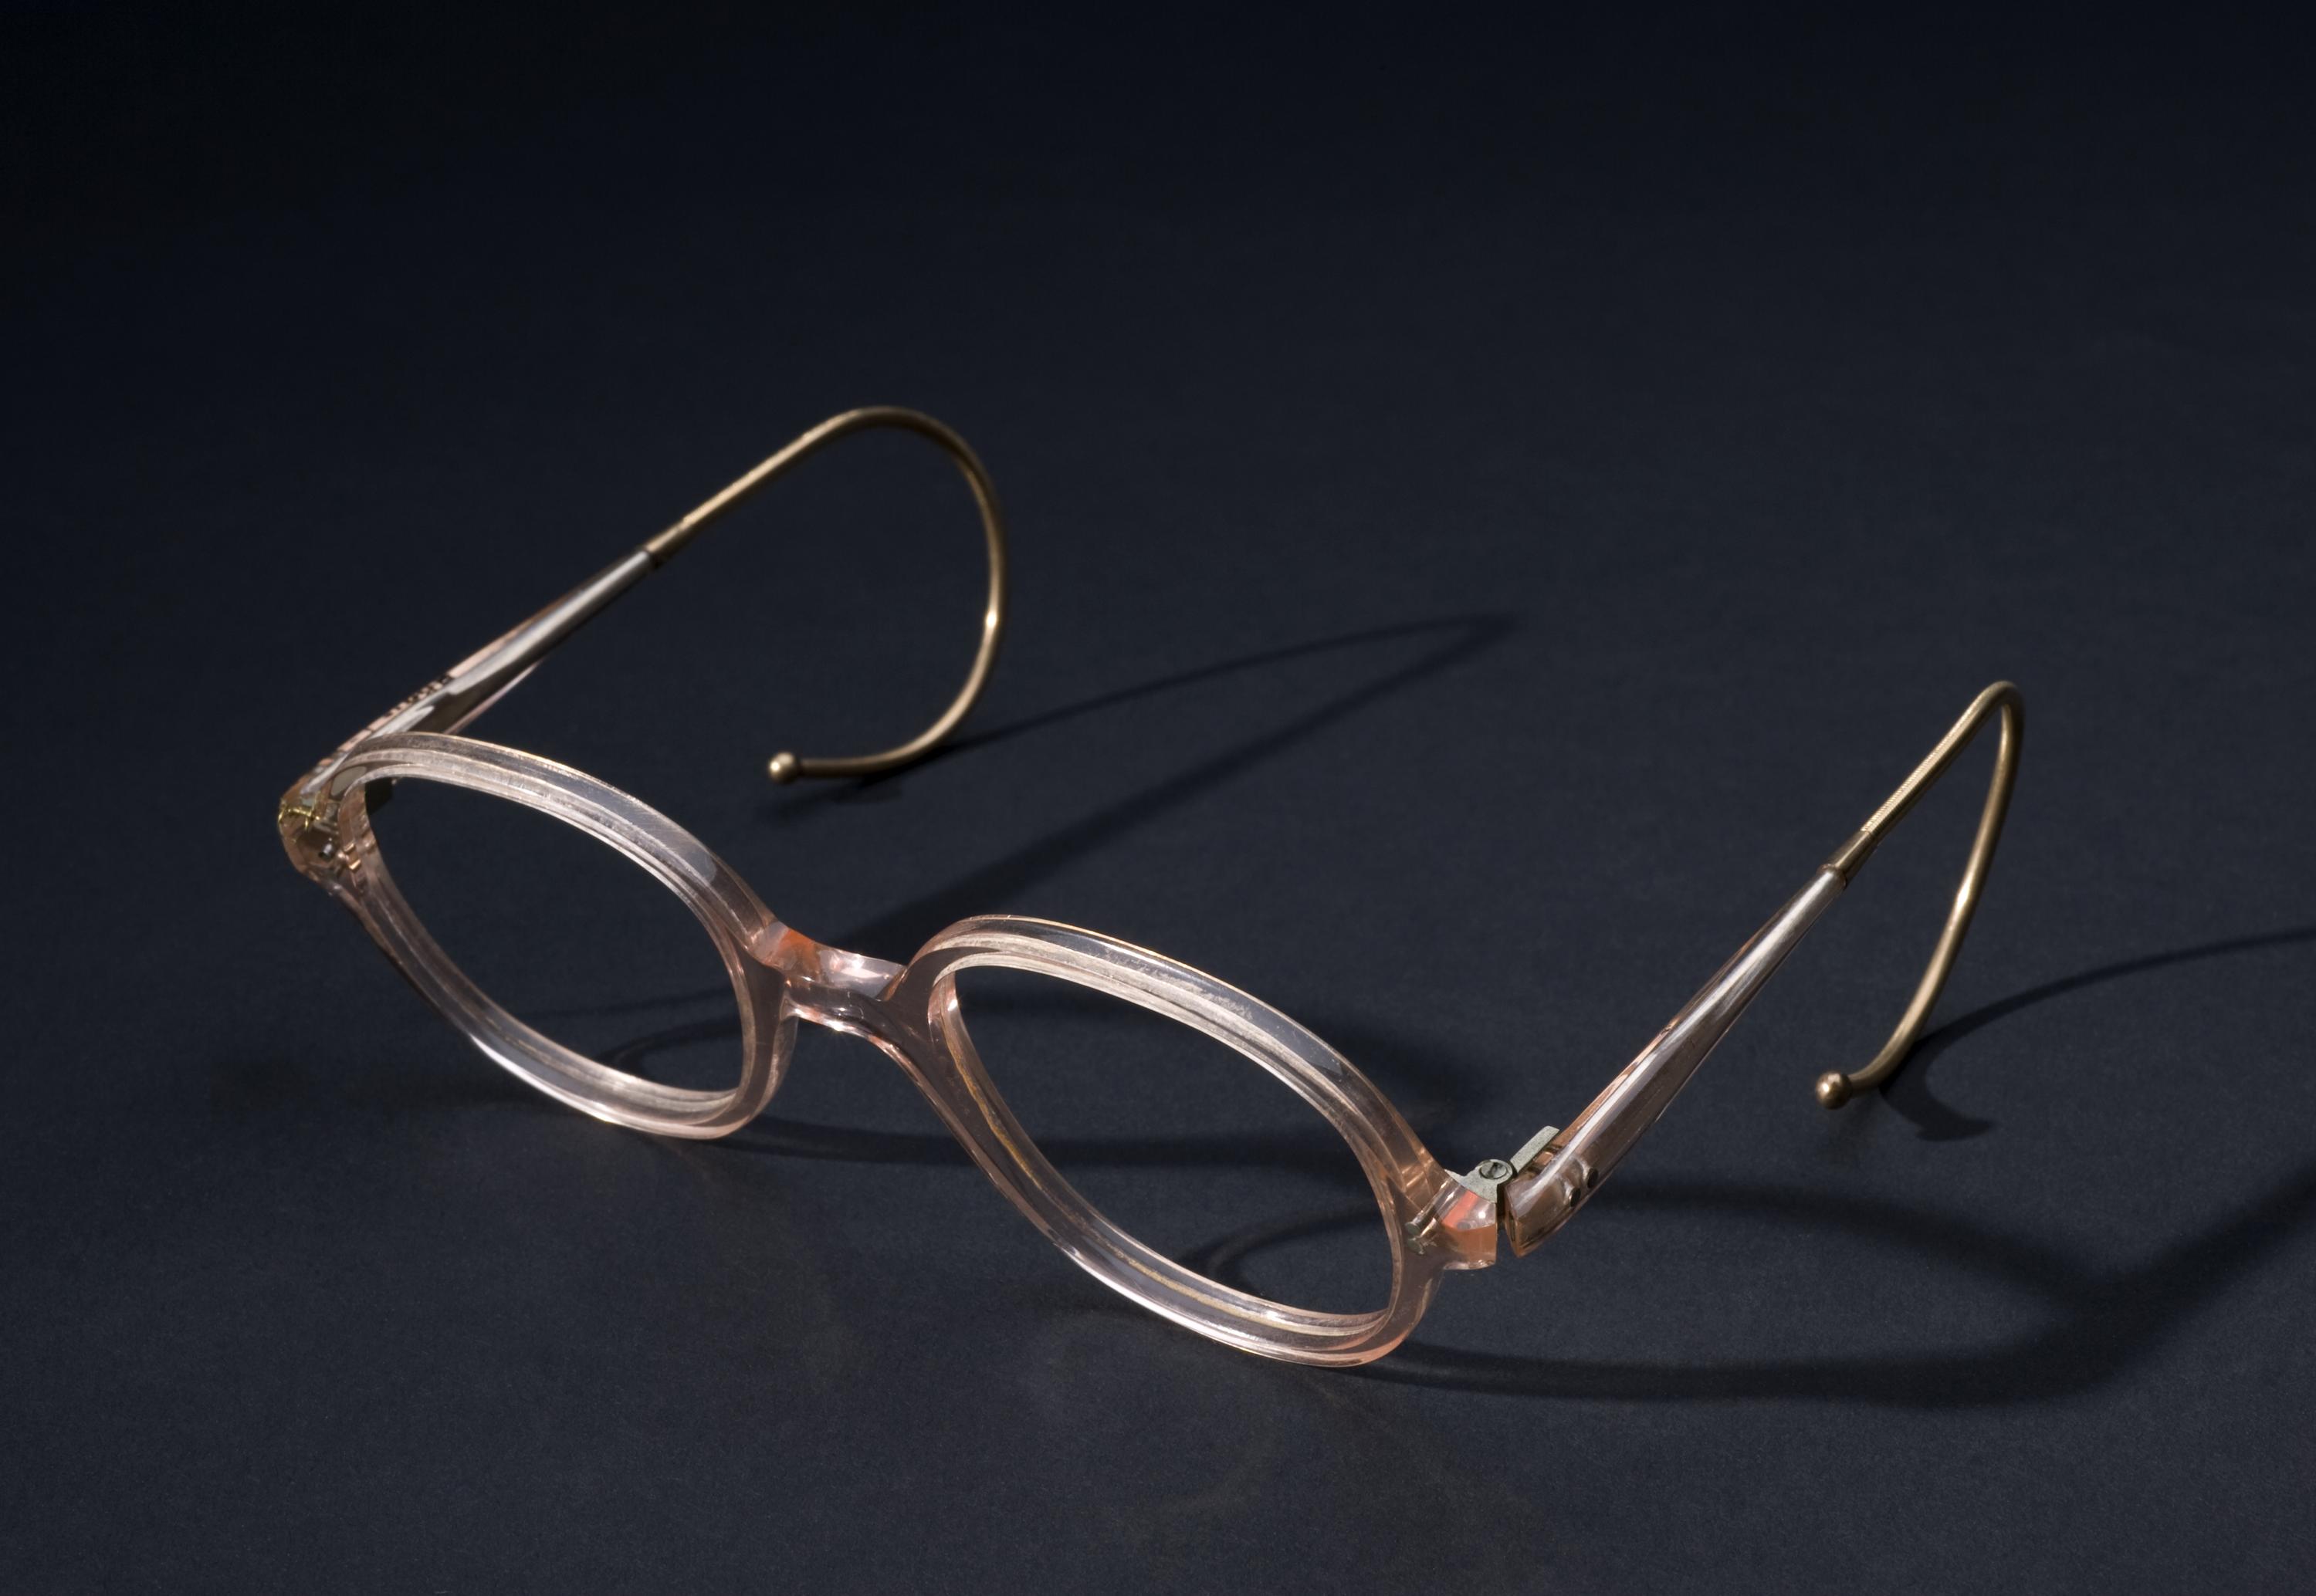 Pair of coil spring spectacle frames, National Health Service issue, 1955-1969